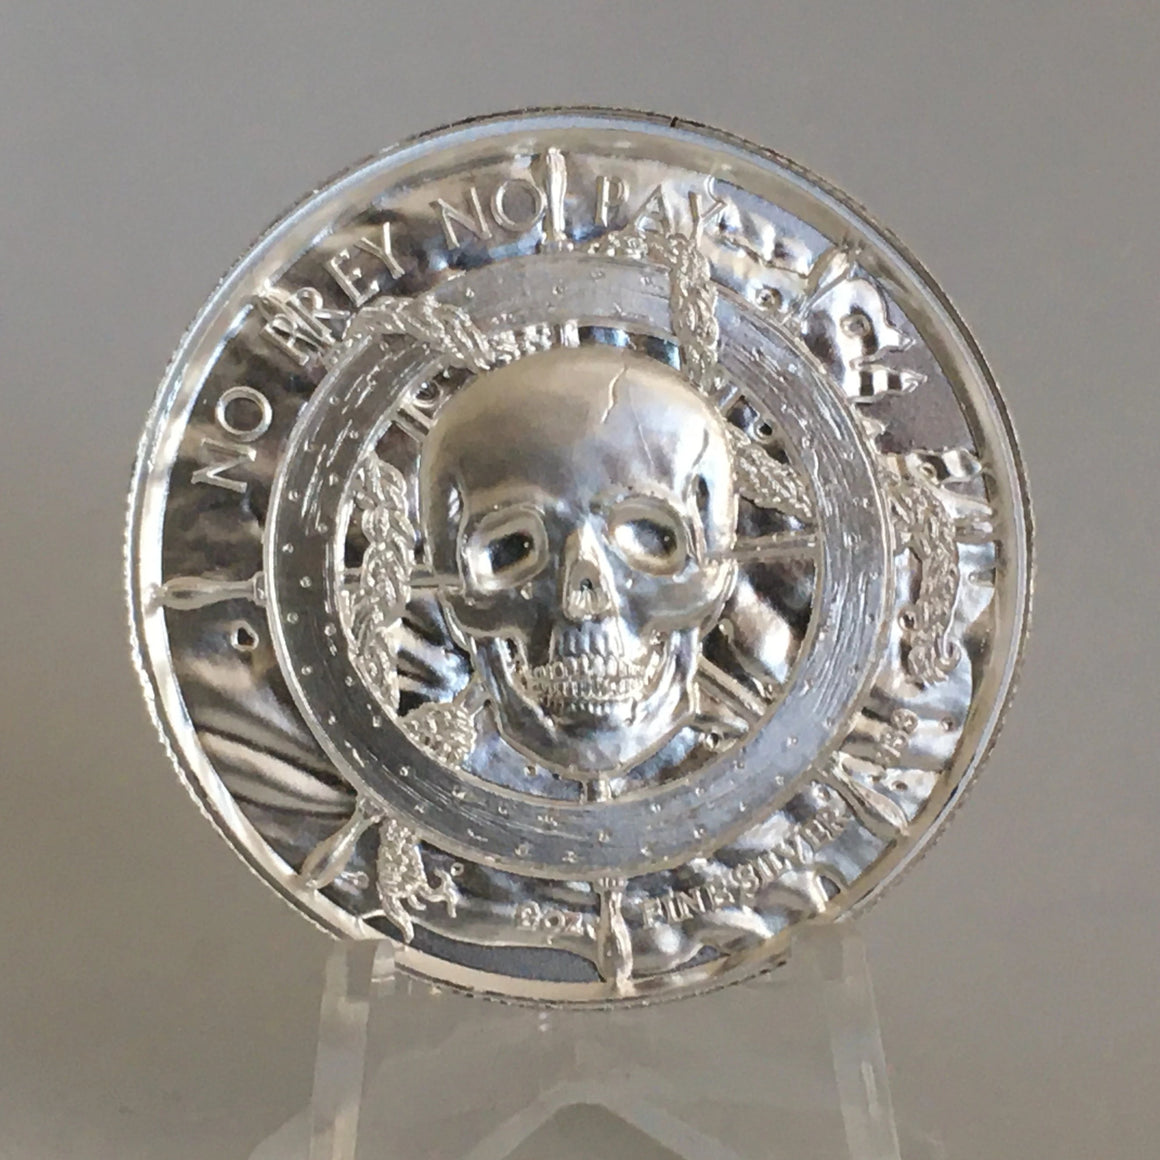 Privateer Series: Siren, 2oz Ultra High Relief Silver Round